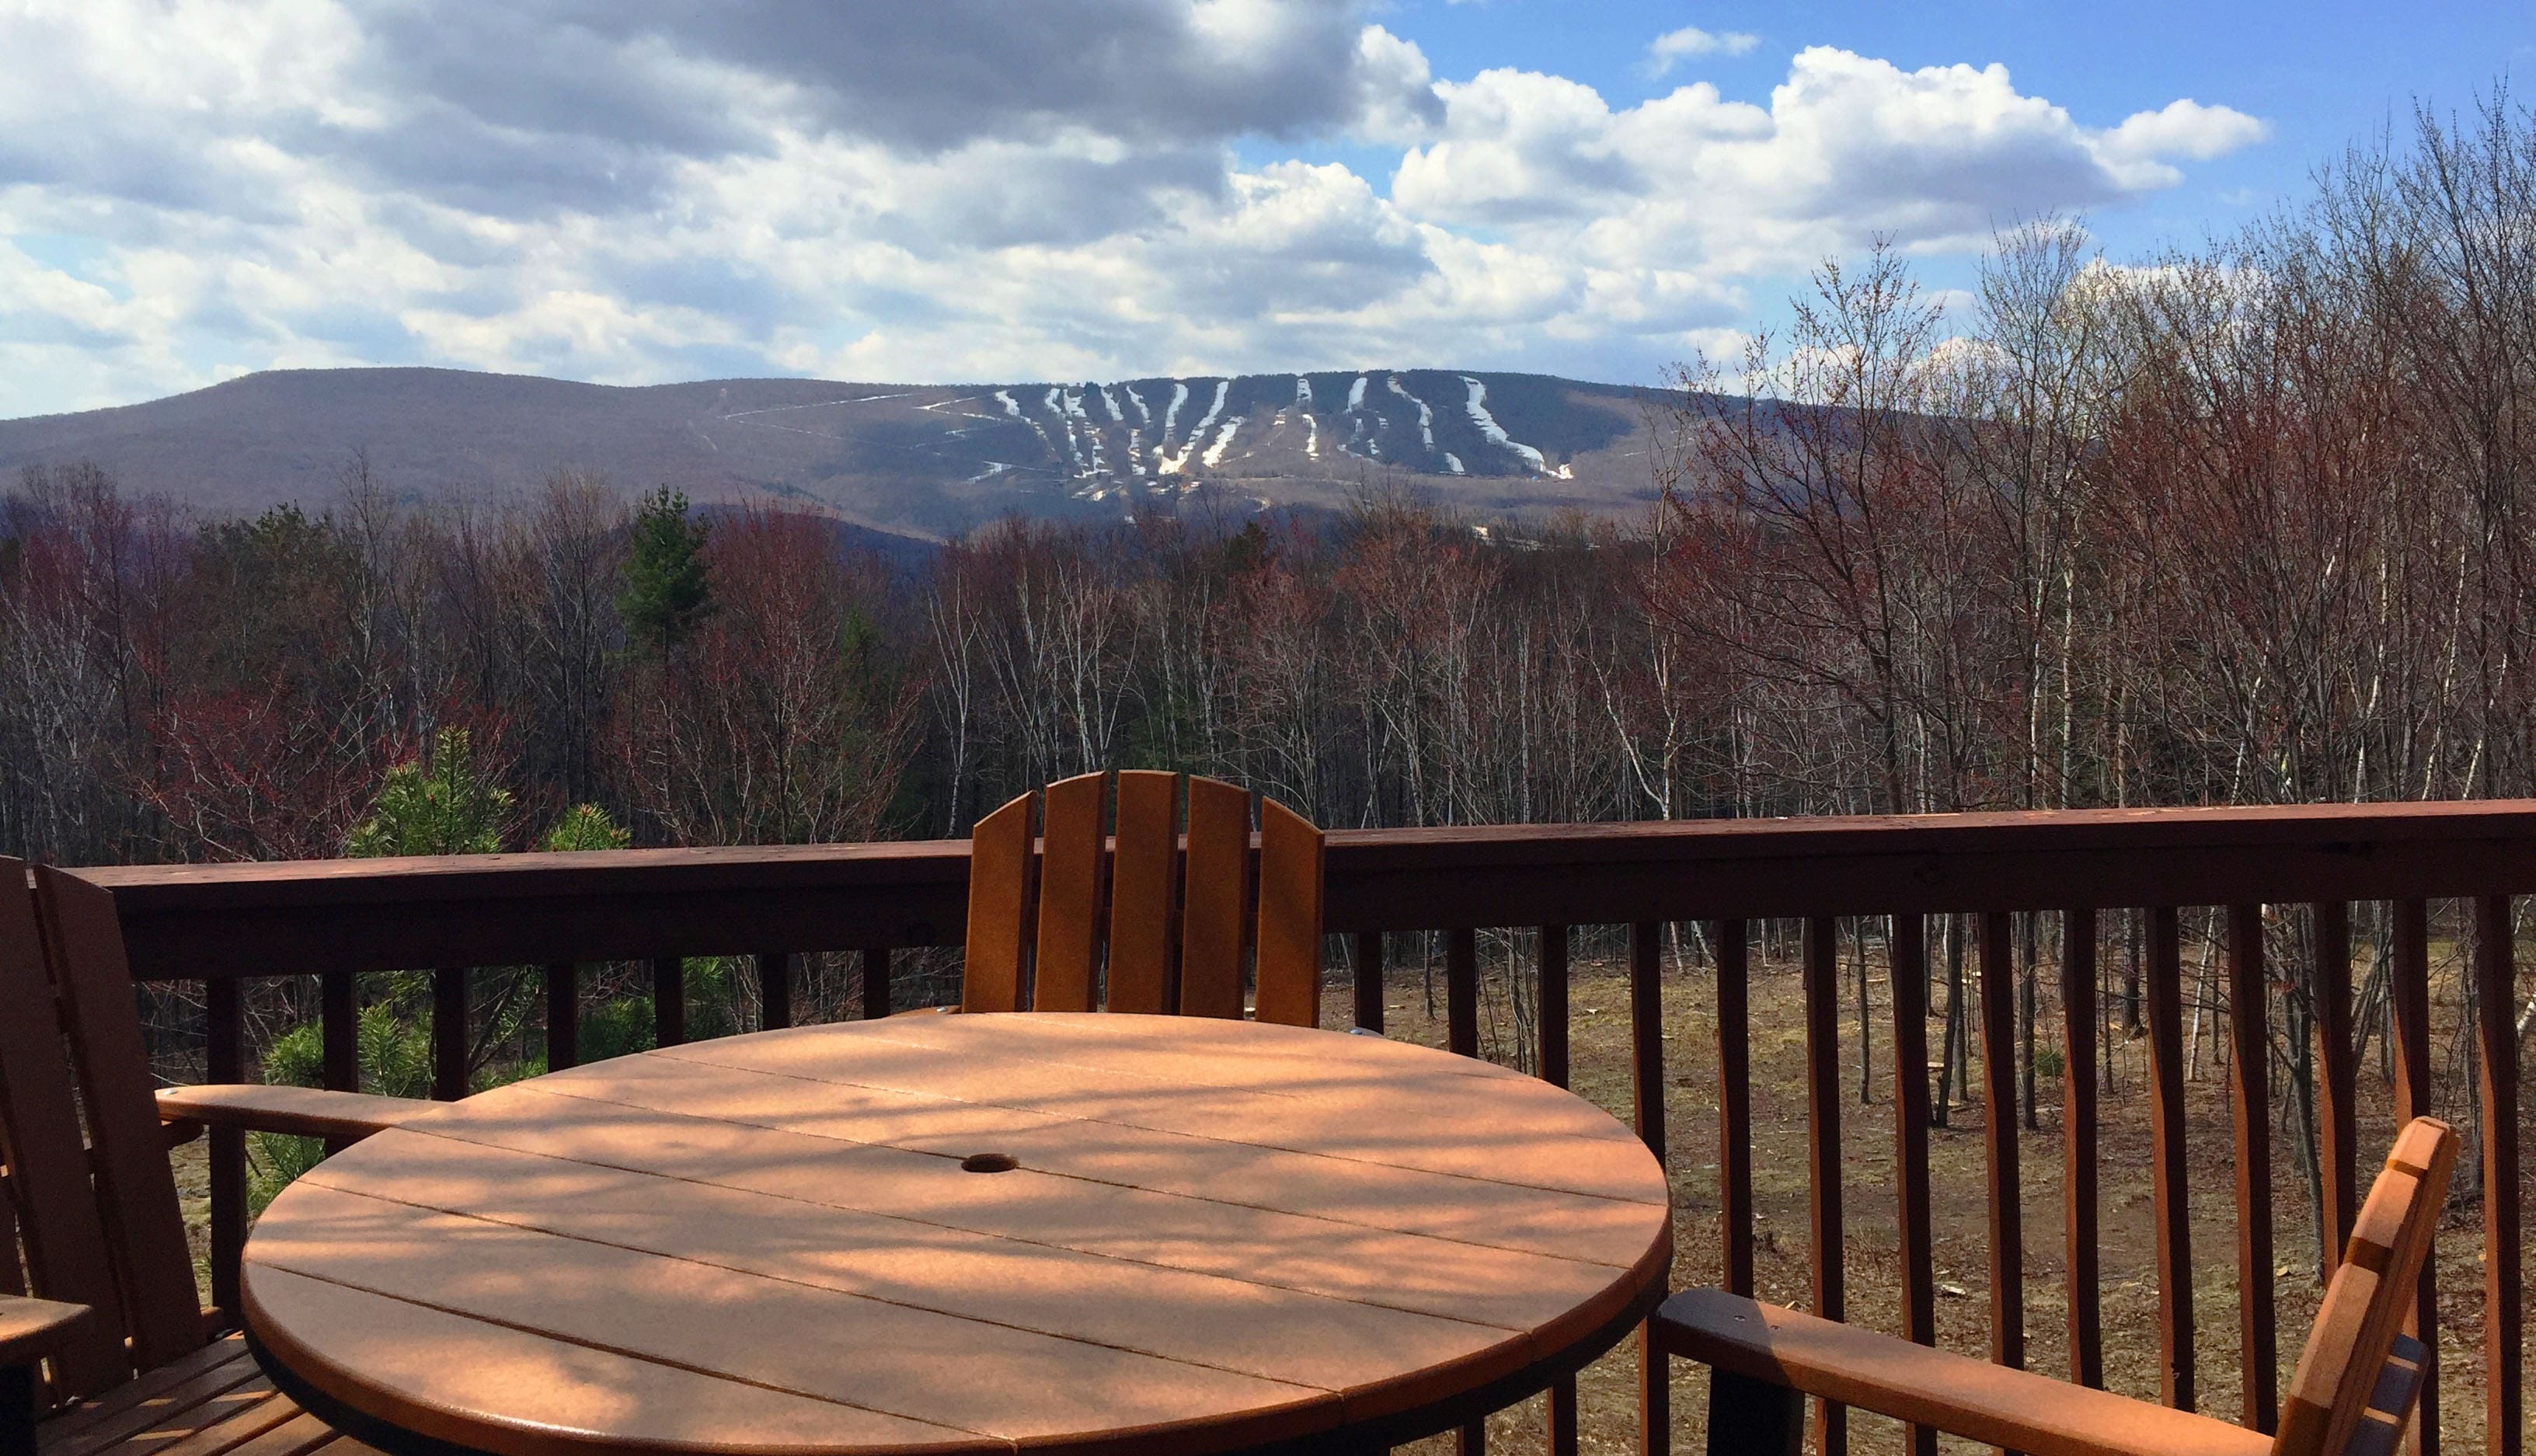 Did we mention the amazing views from the deck?